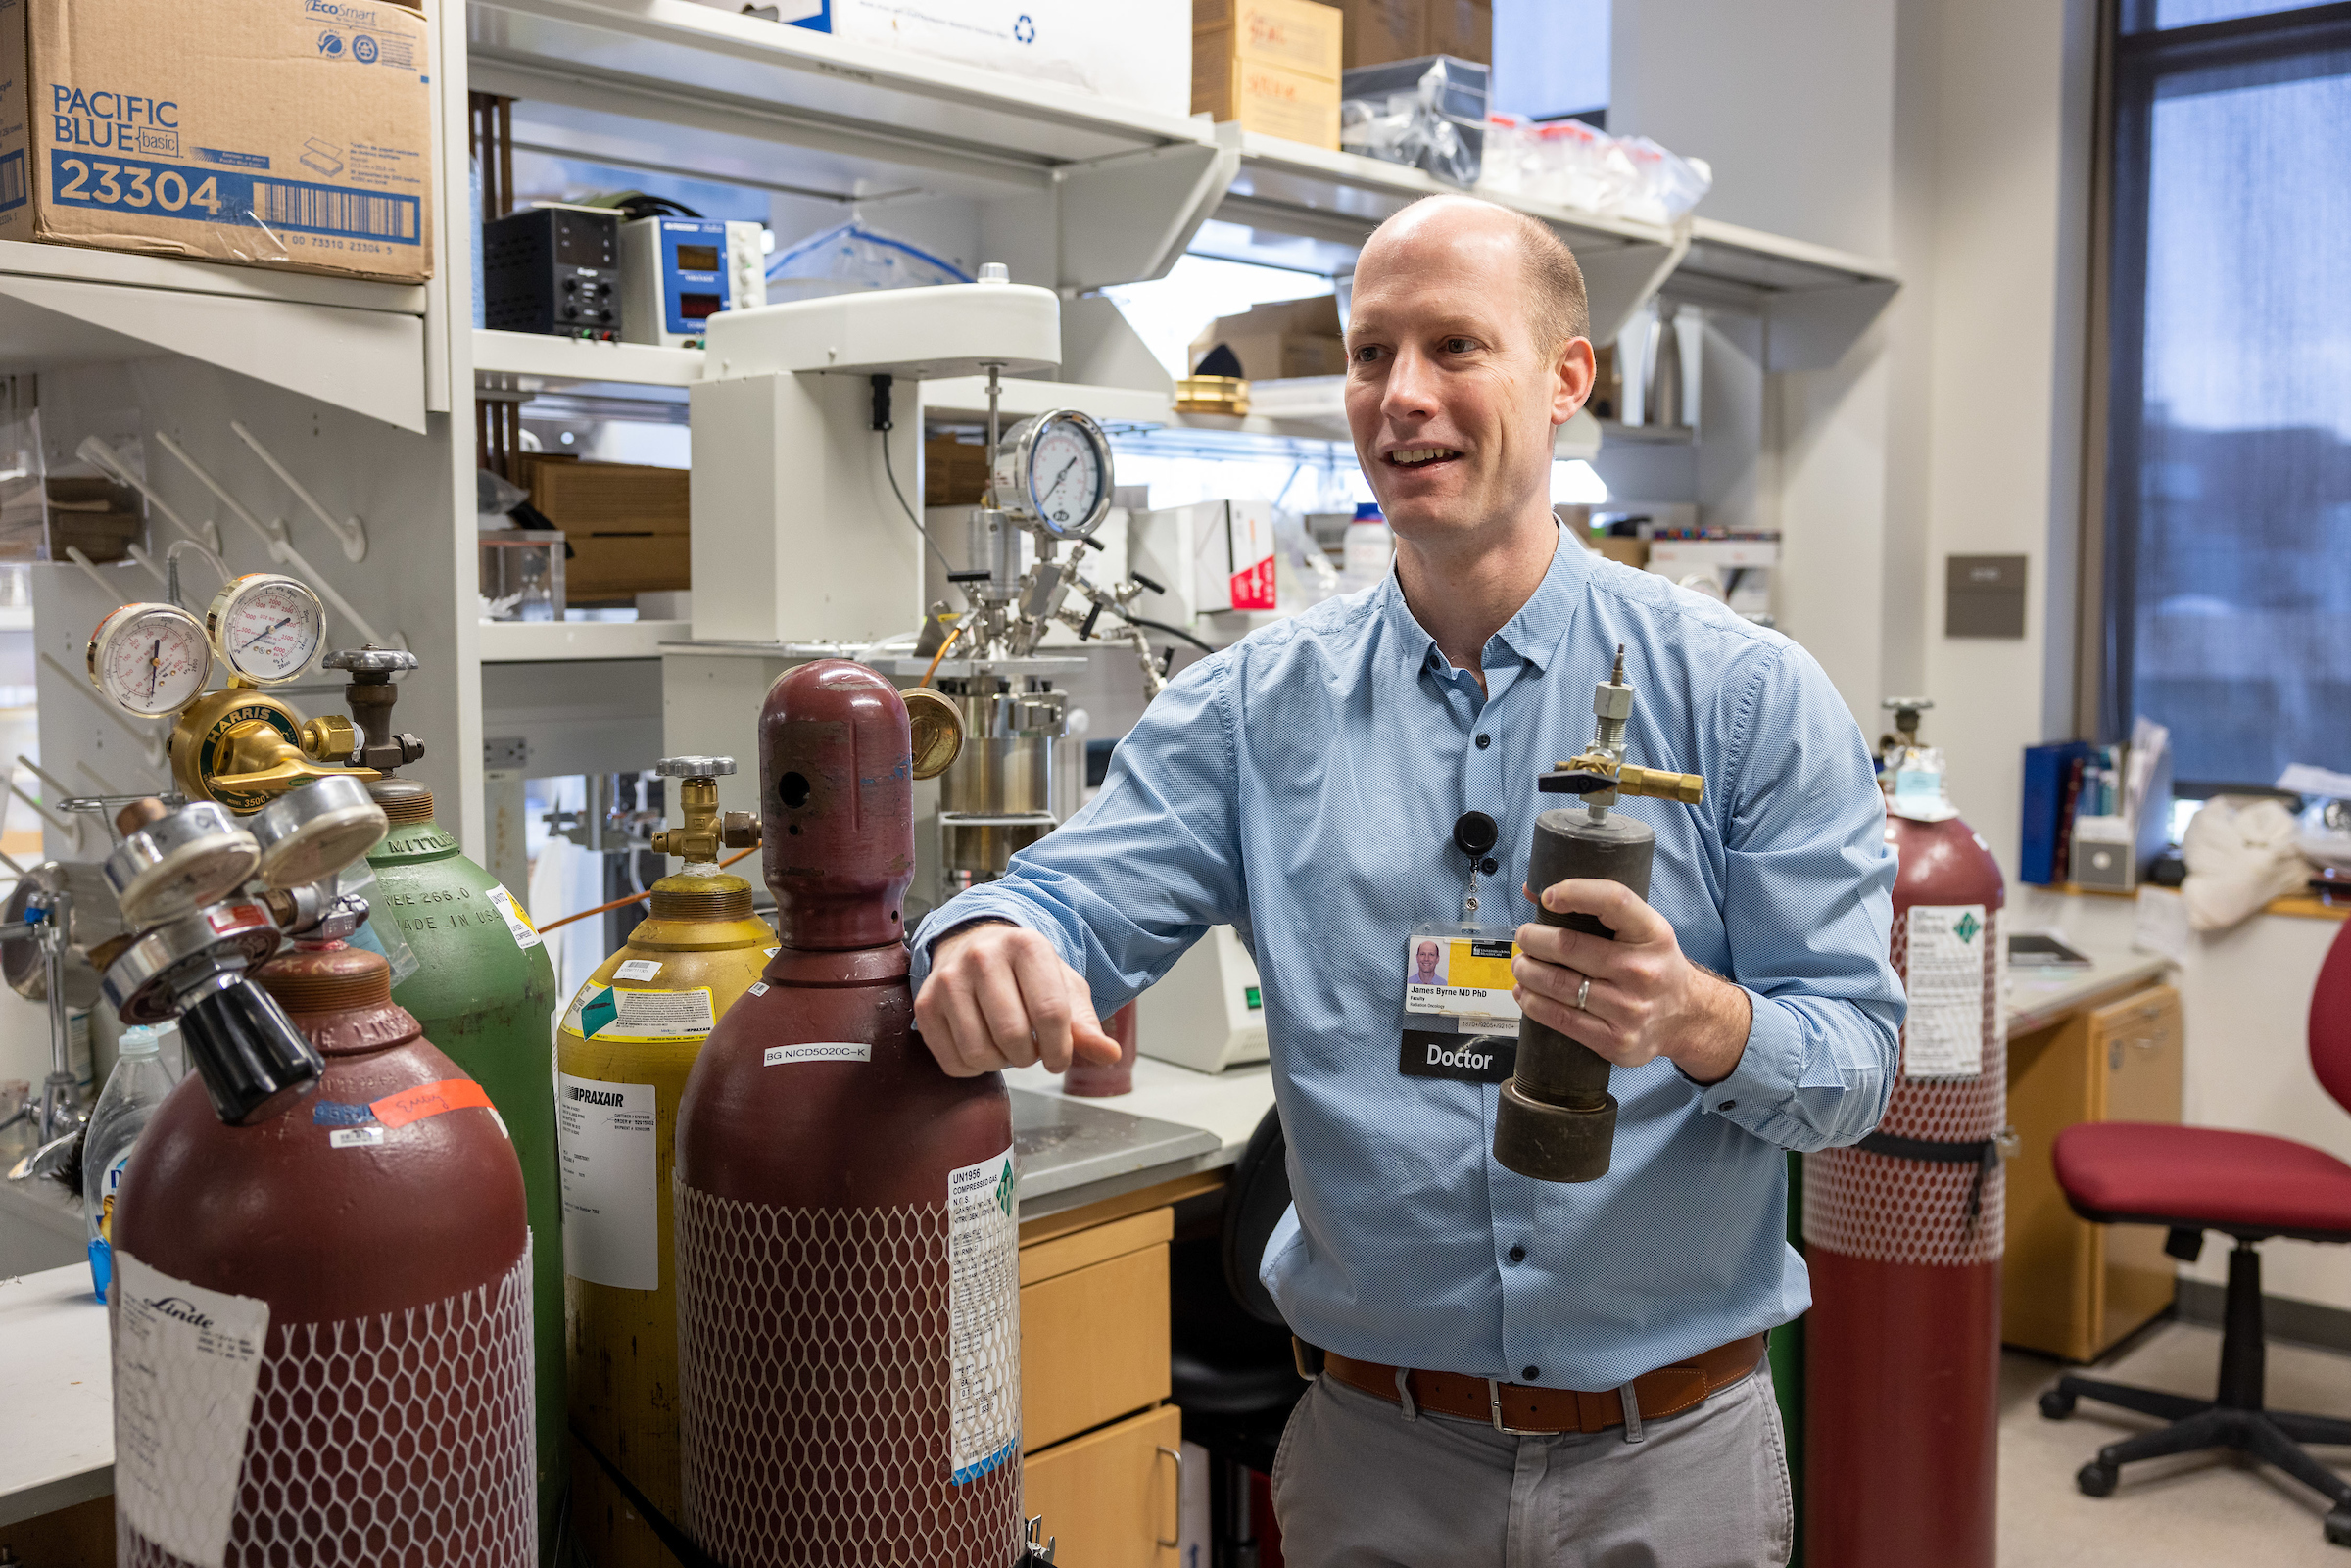 Dr. James Byrne holds the modified whipping siphon in his lab at the University of Iowa. Around him are large tanks of pressurized gas.